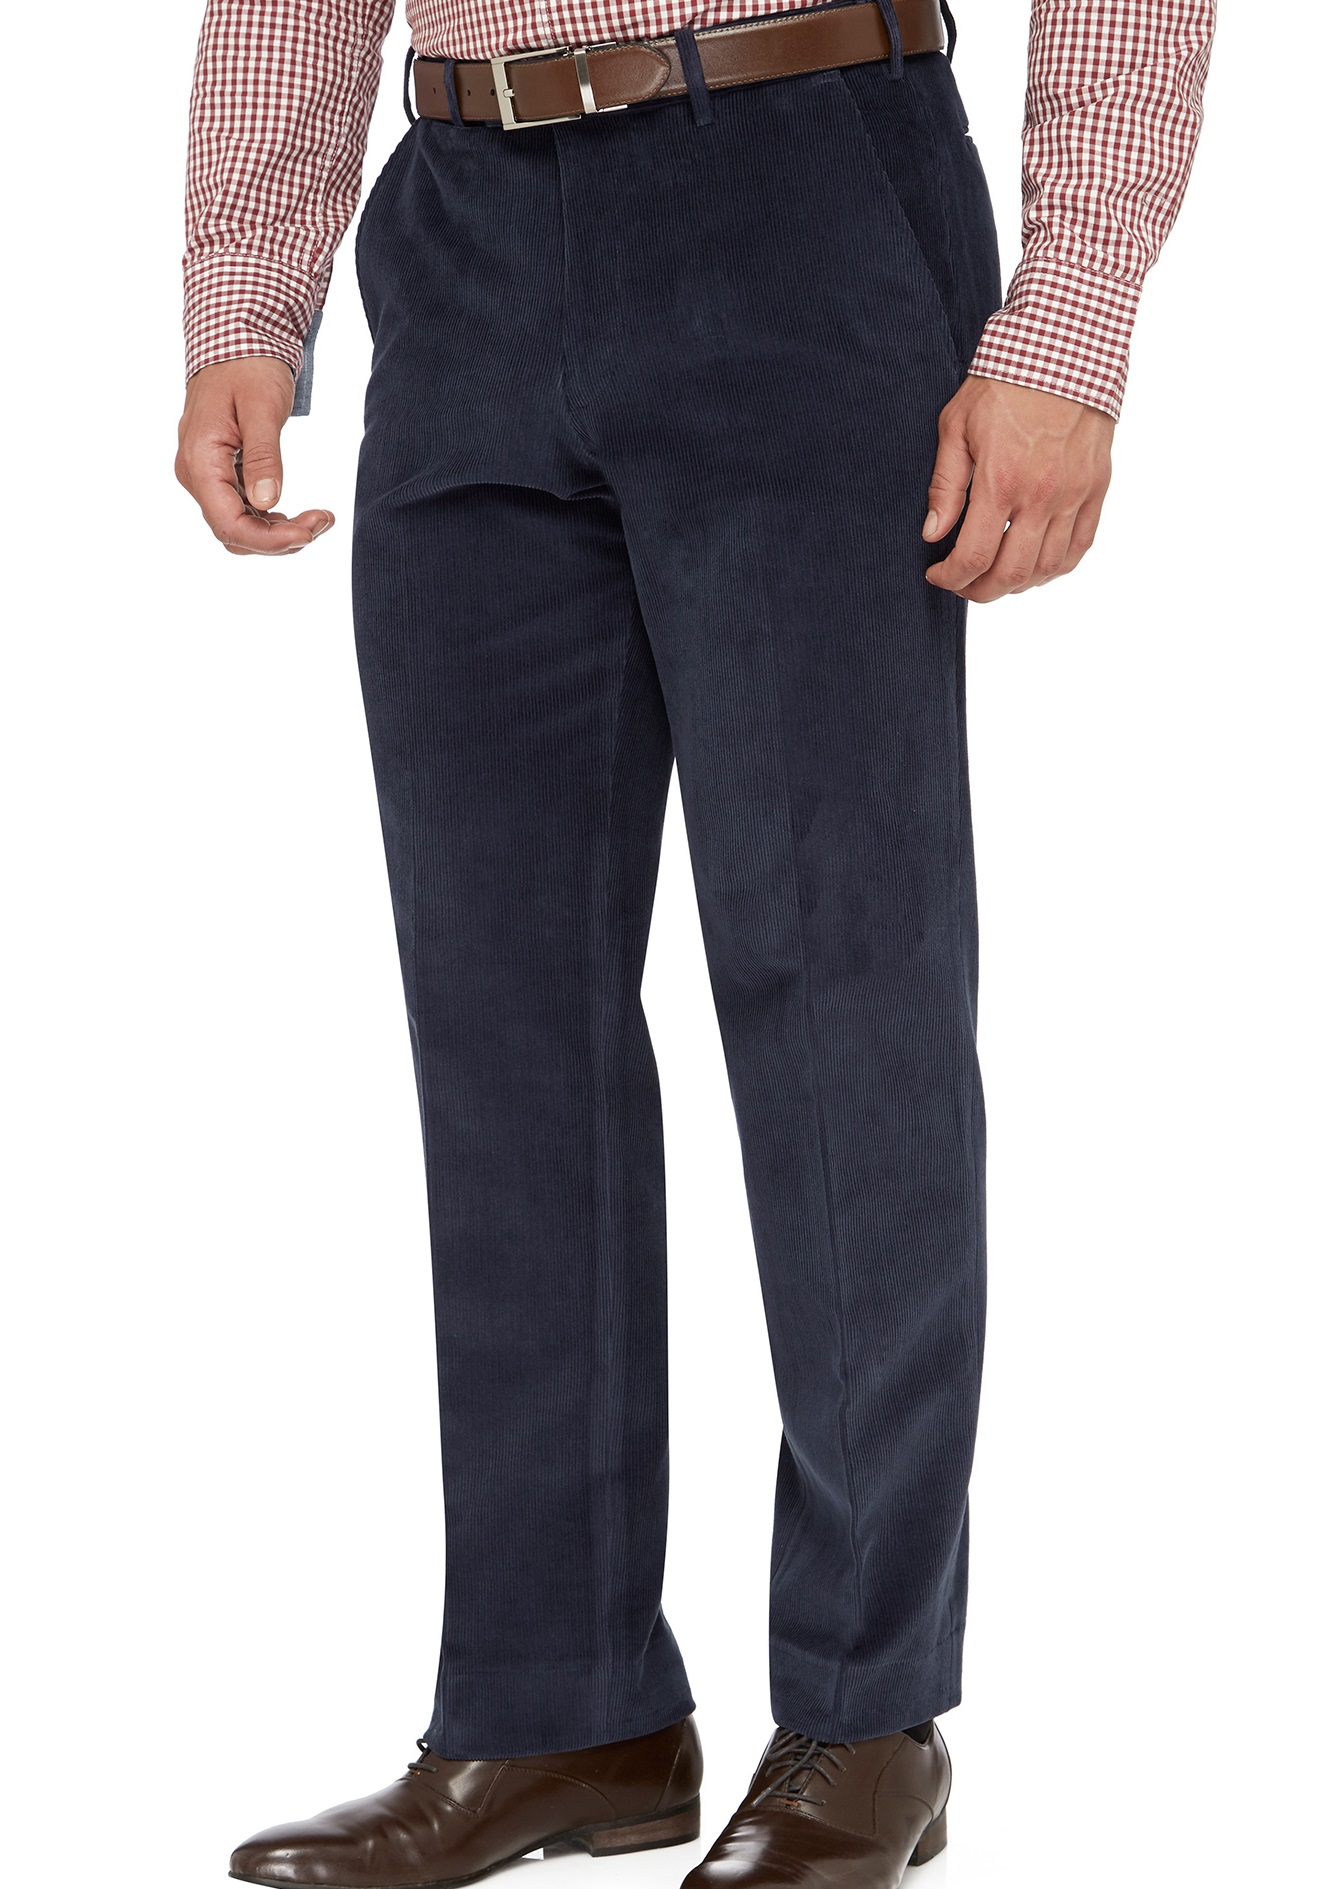 Cord Pants | Quality Mens Cord Pants by City Club Free Delivery